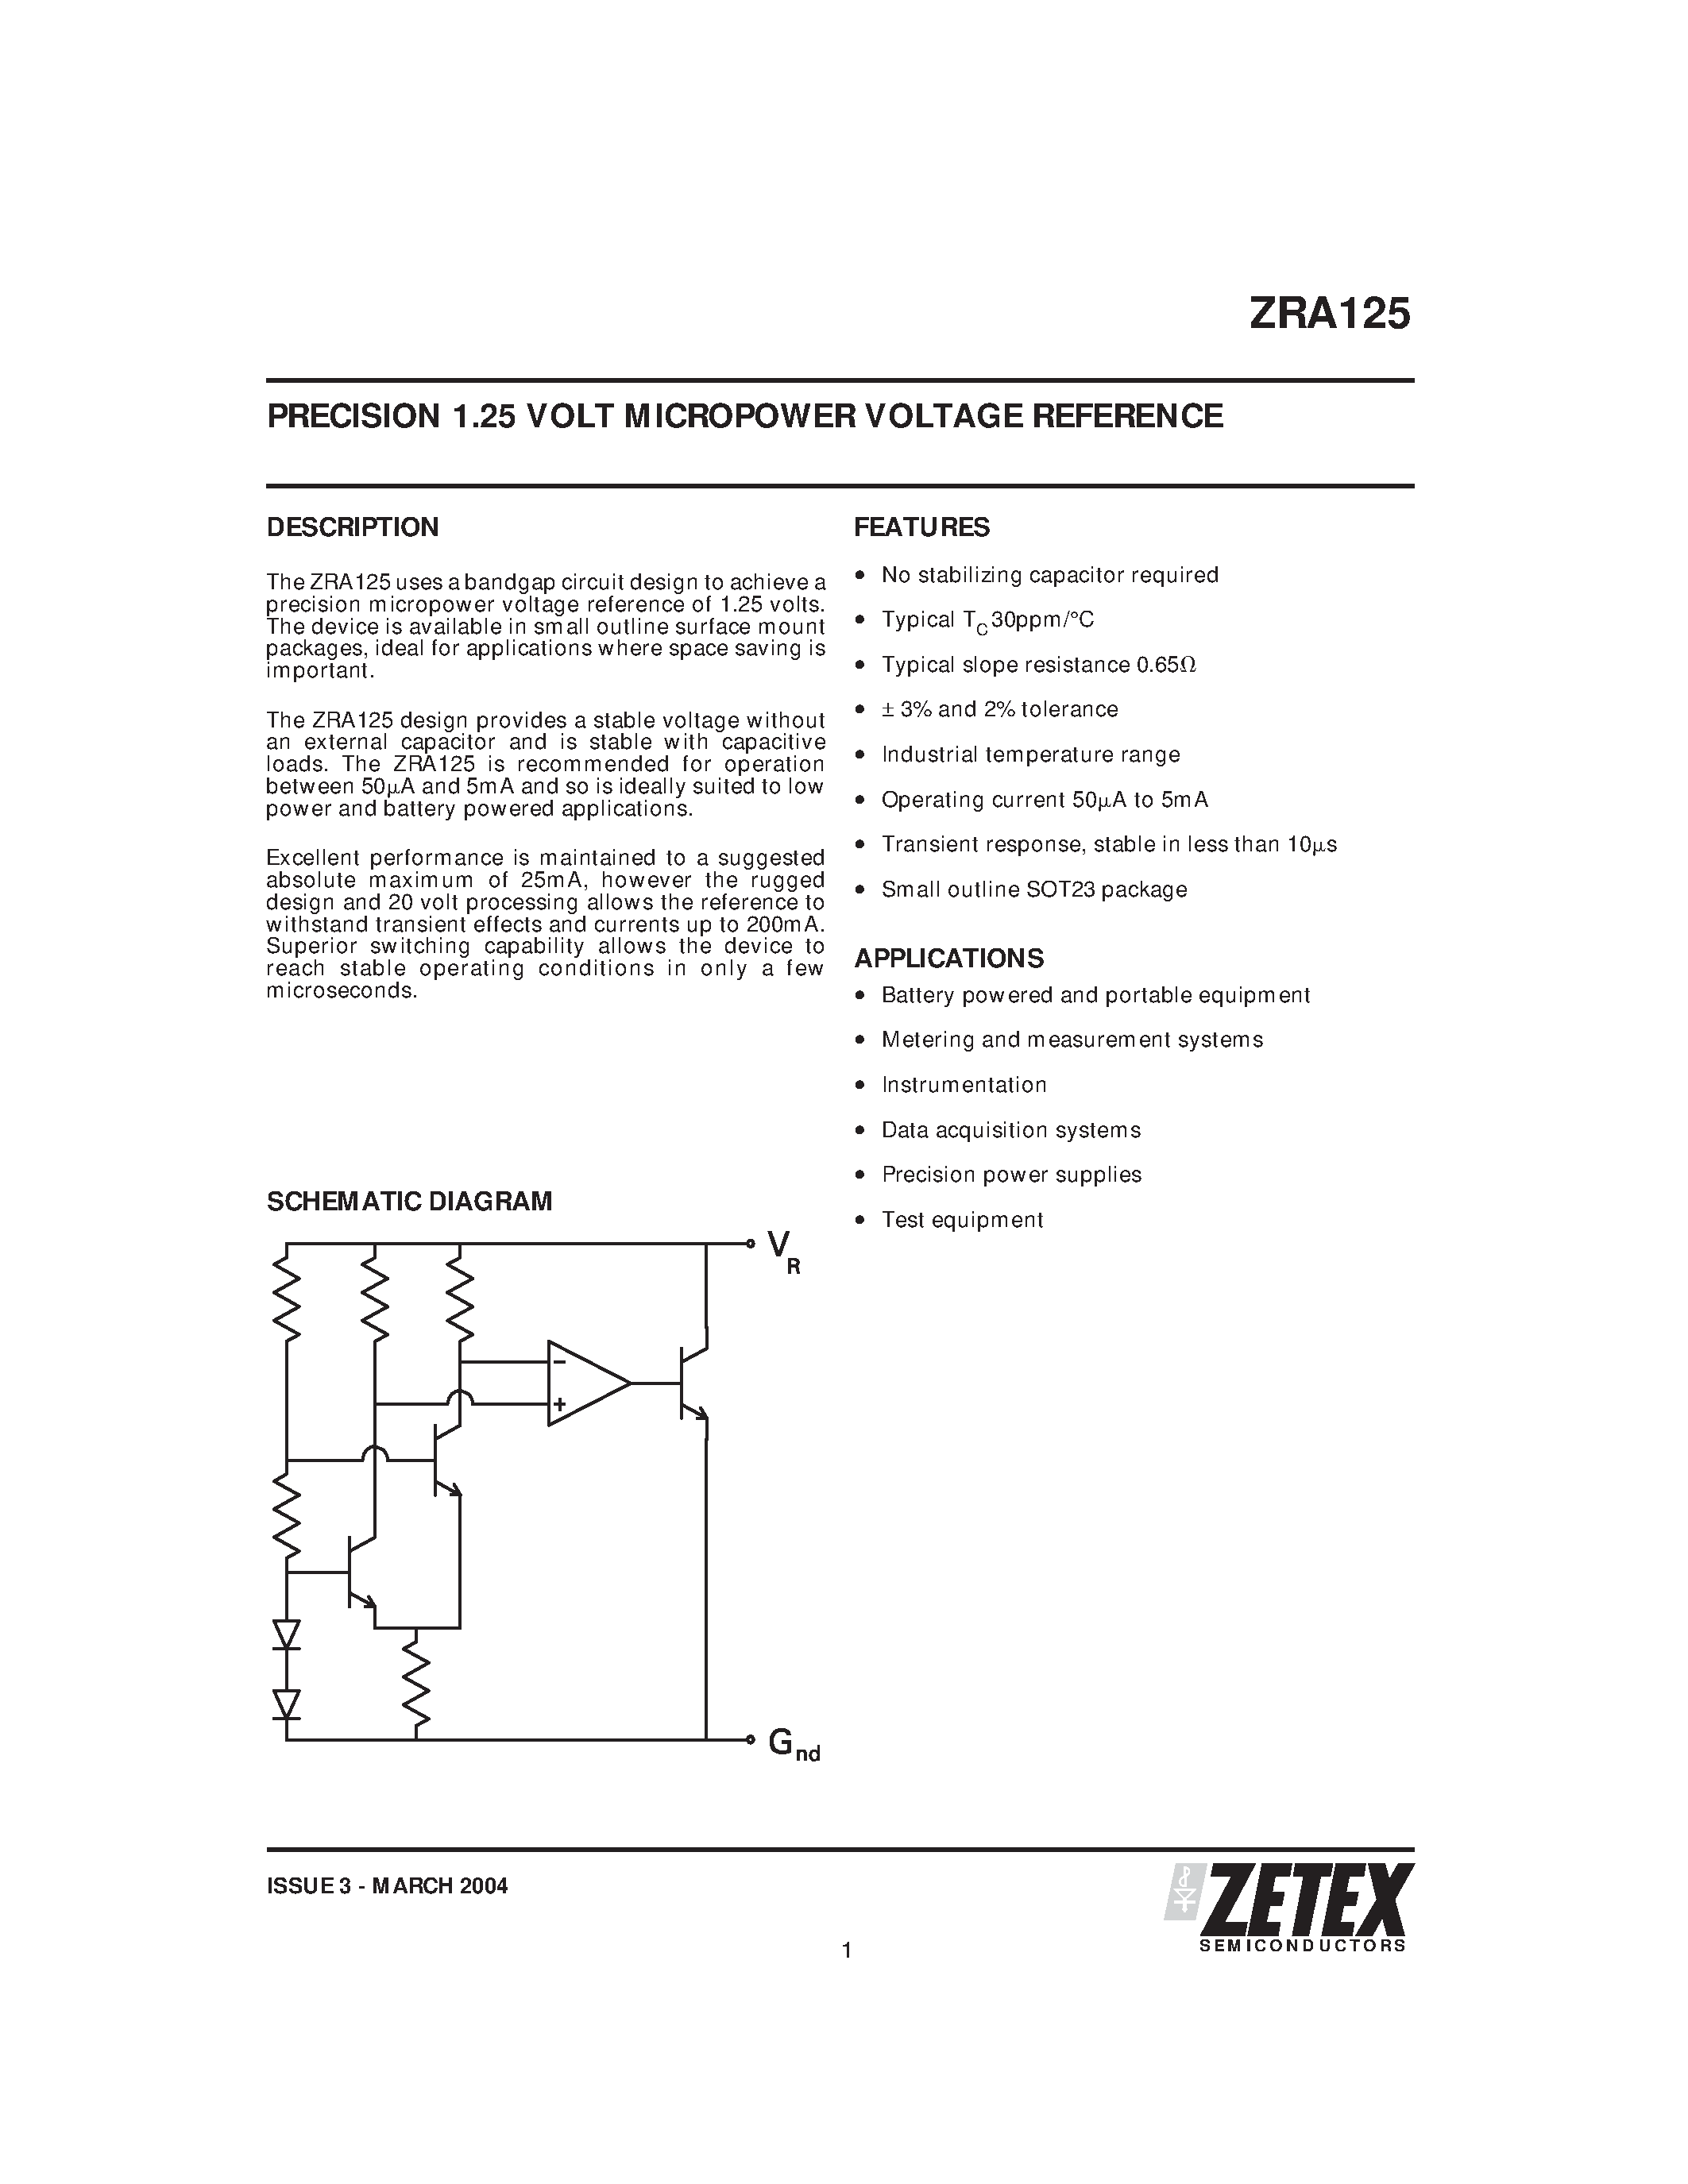 Datasheet ZRA125F03TA - PRECISION 1.25 VOLT MICROPOWER VOLTAGE REFERENCE page 1